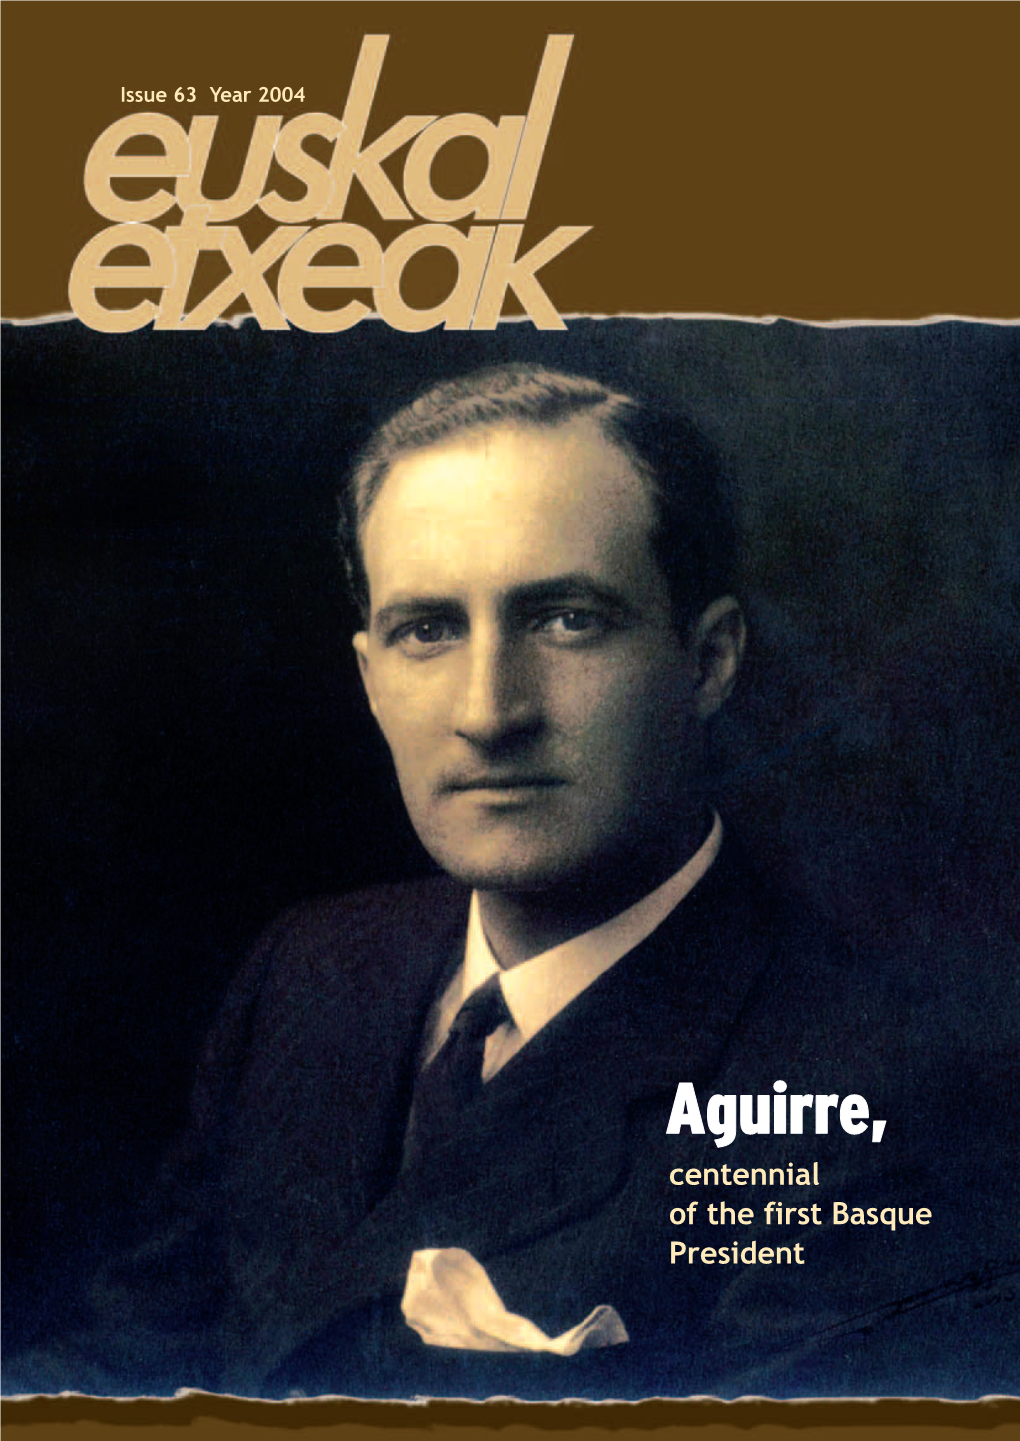 Aguirre, Centennial of the First Basque President Issue 63 Year 2004 AURKIBIDEA / TABLE of CONTENTS